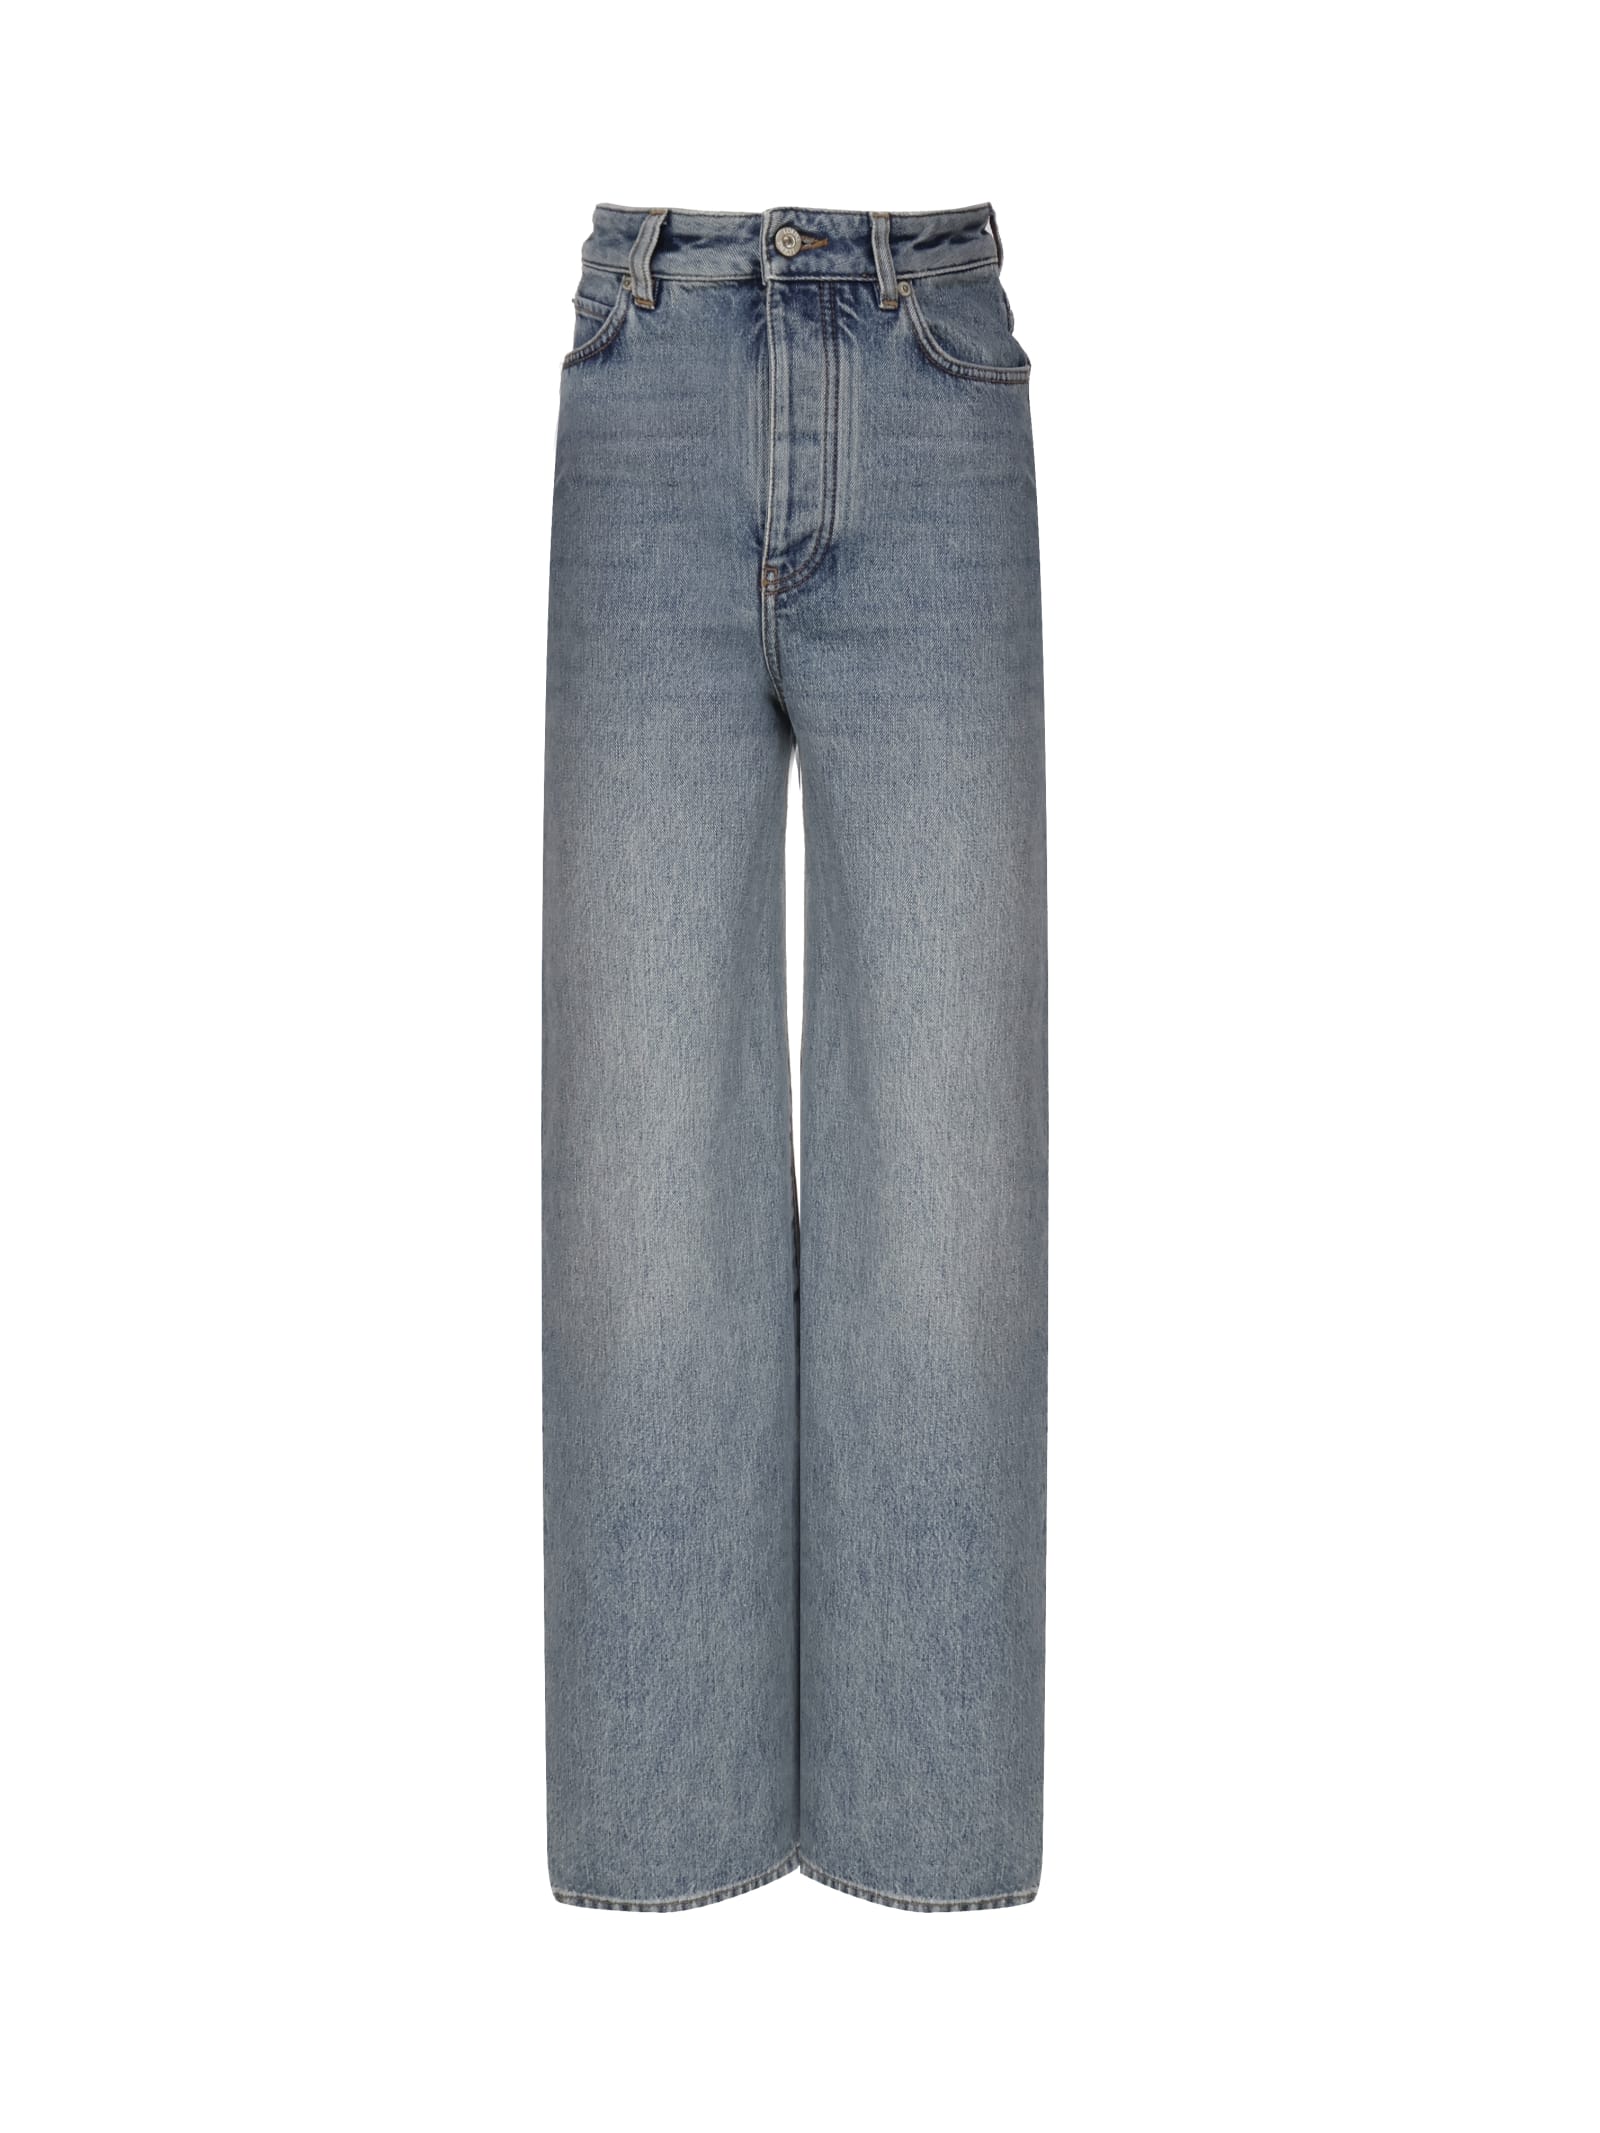 Loewe Jeans Crafted In Medium-weight Washed Cotton Denim In Blue